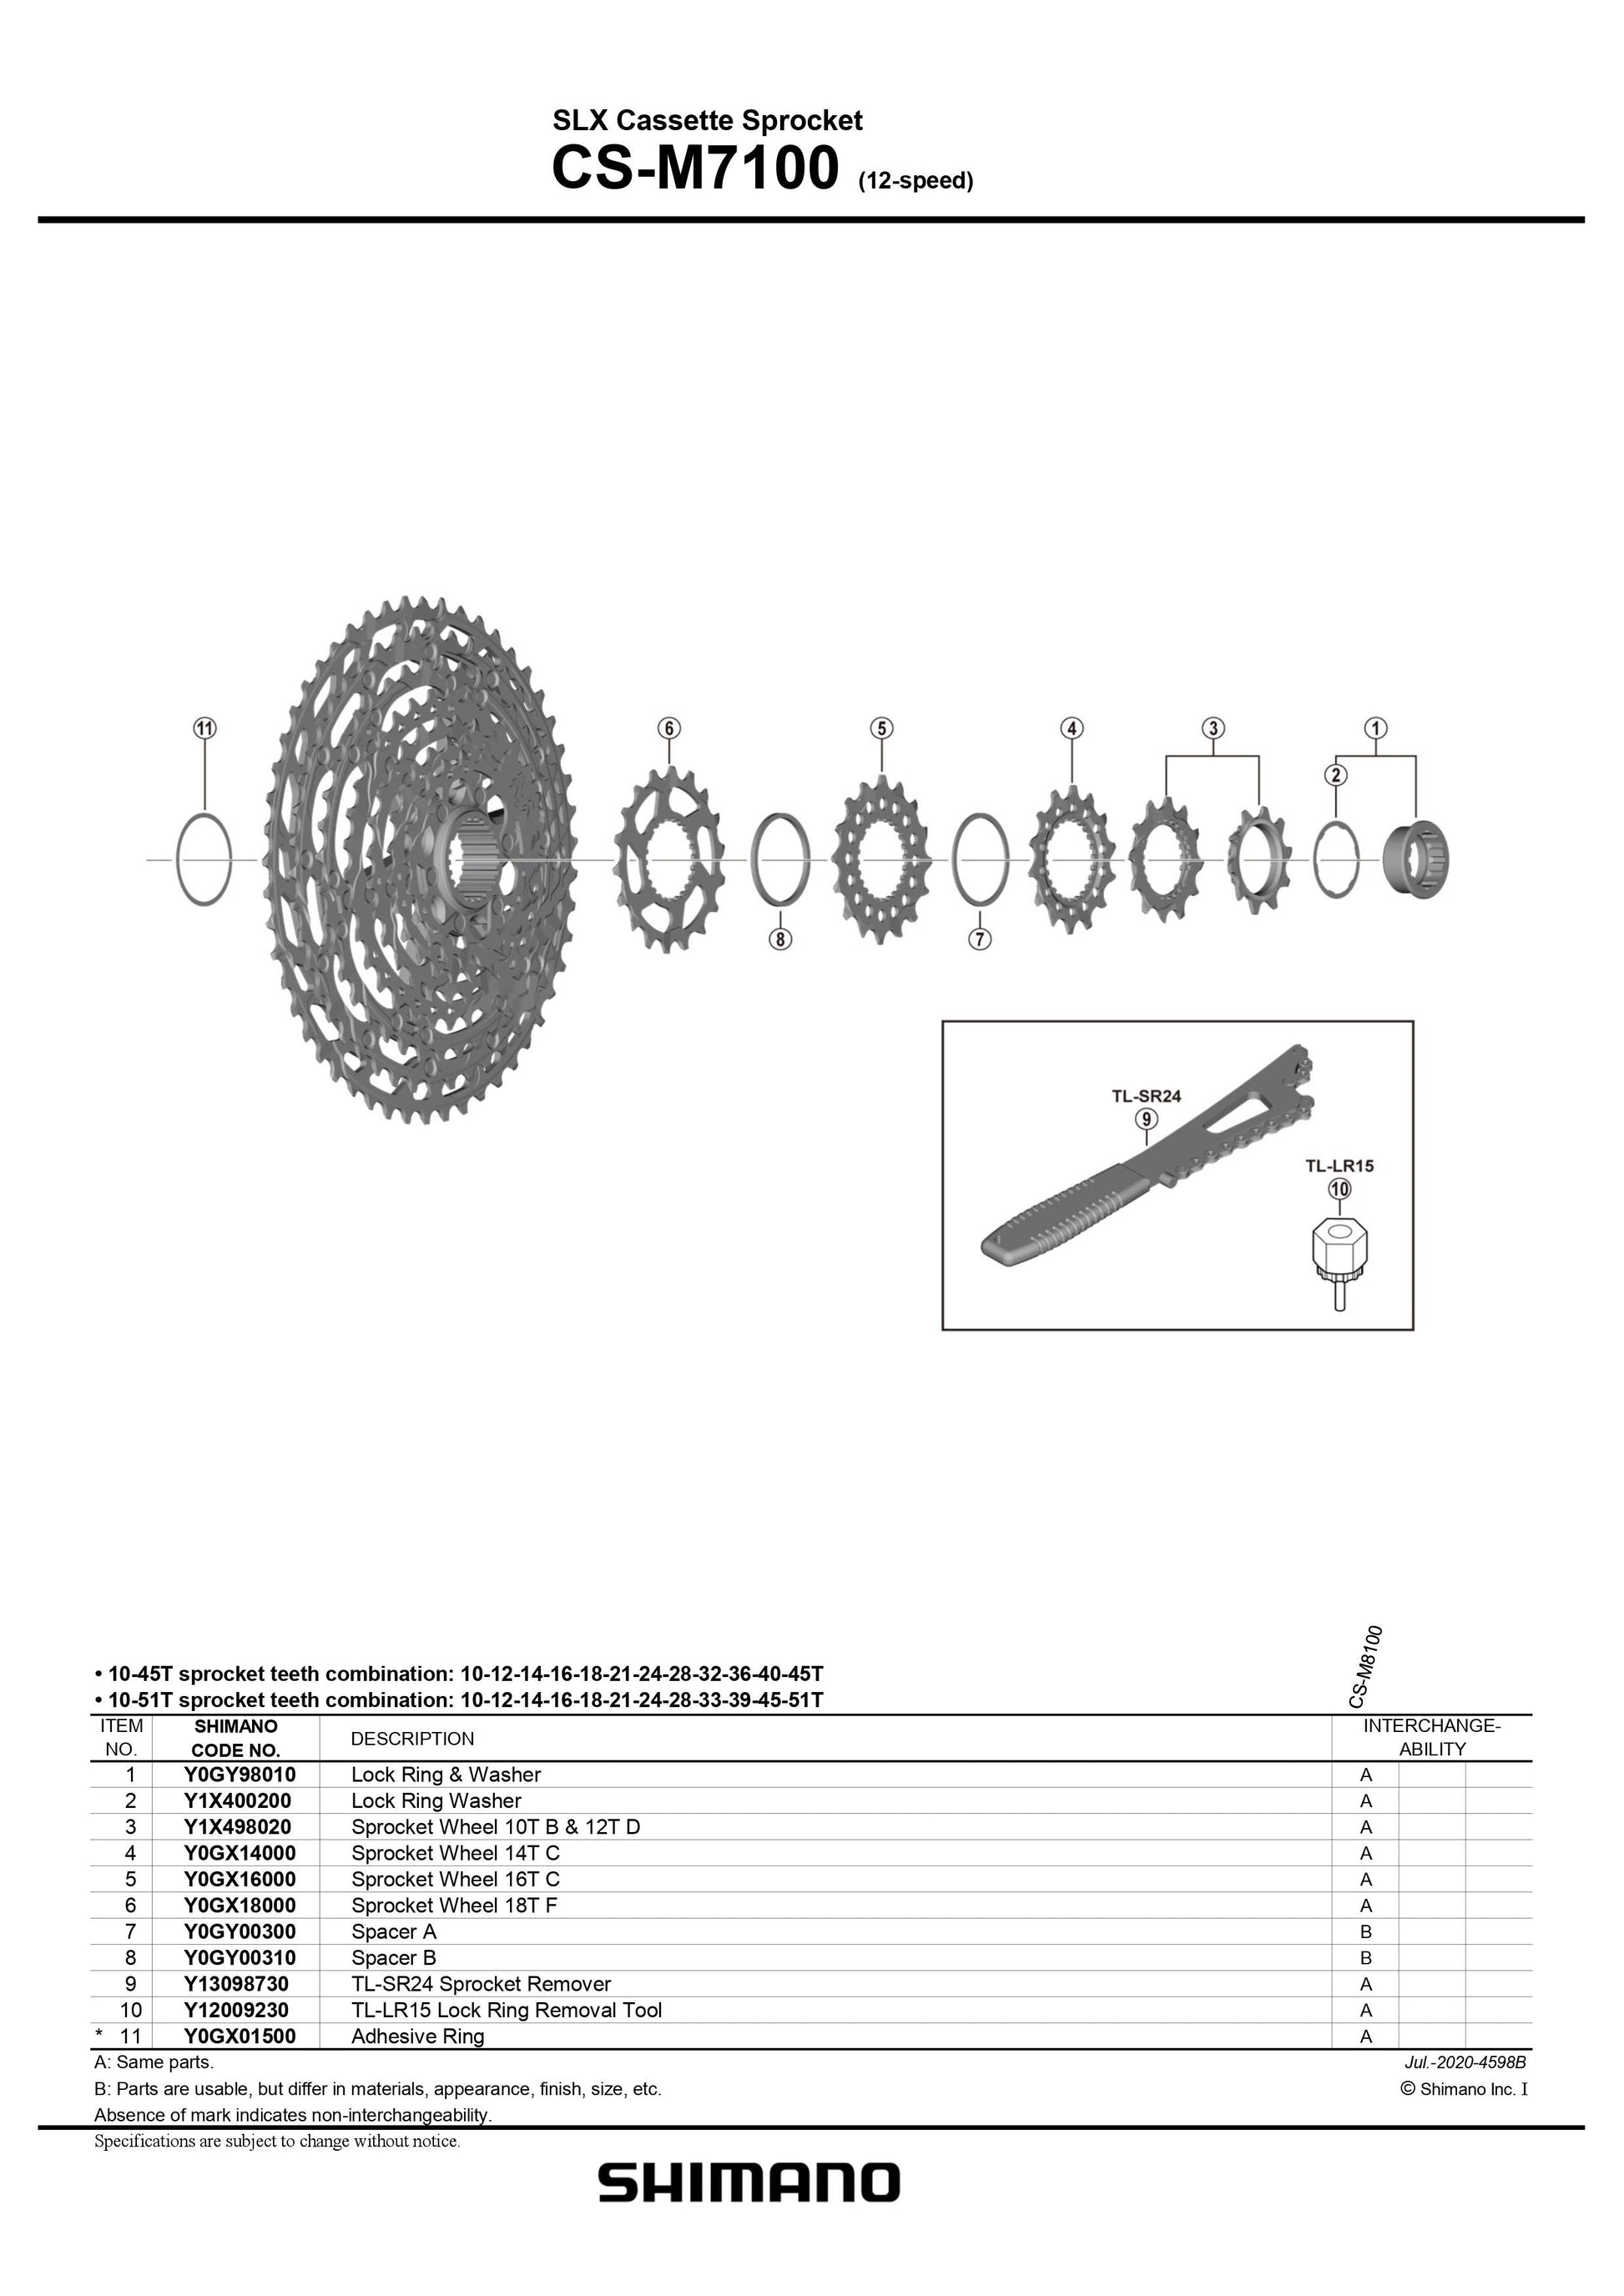 SHIMANO SLX CS-M7100 Cassette Sprocket Spacer A - (12-speed) - Y0GY00300-Pit Crew Cycles